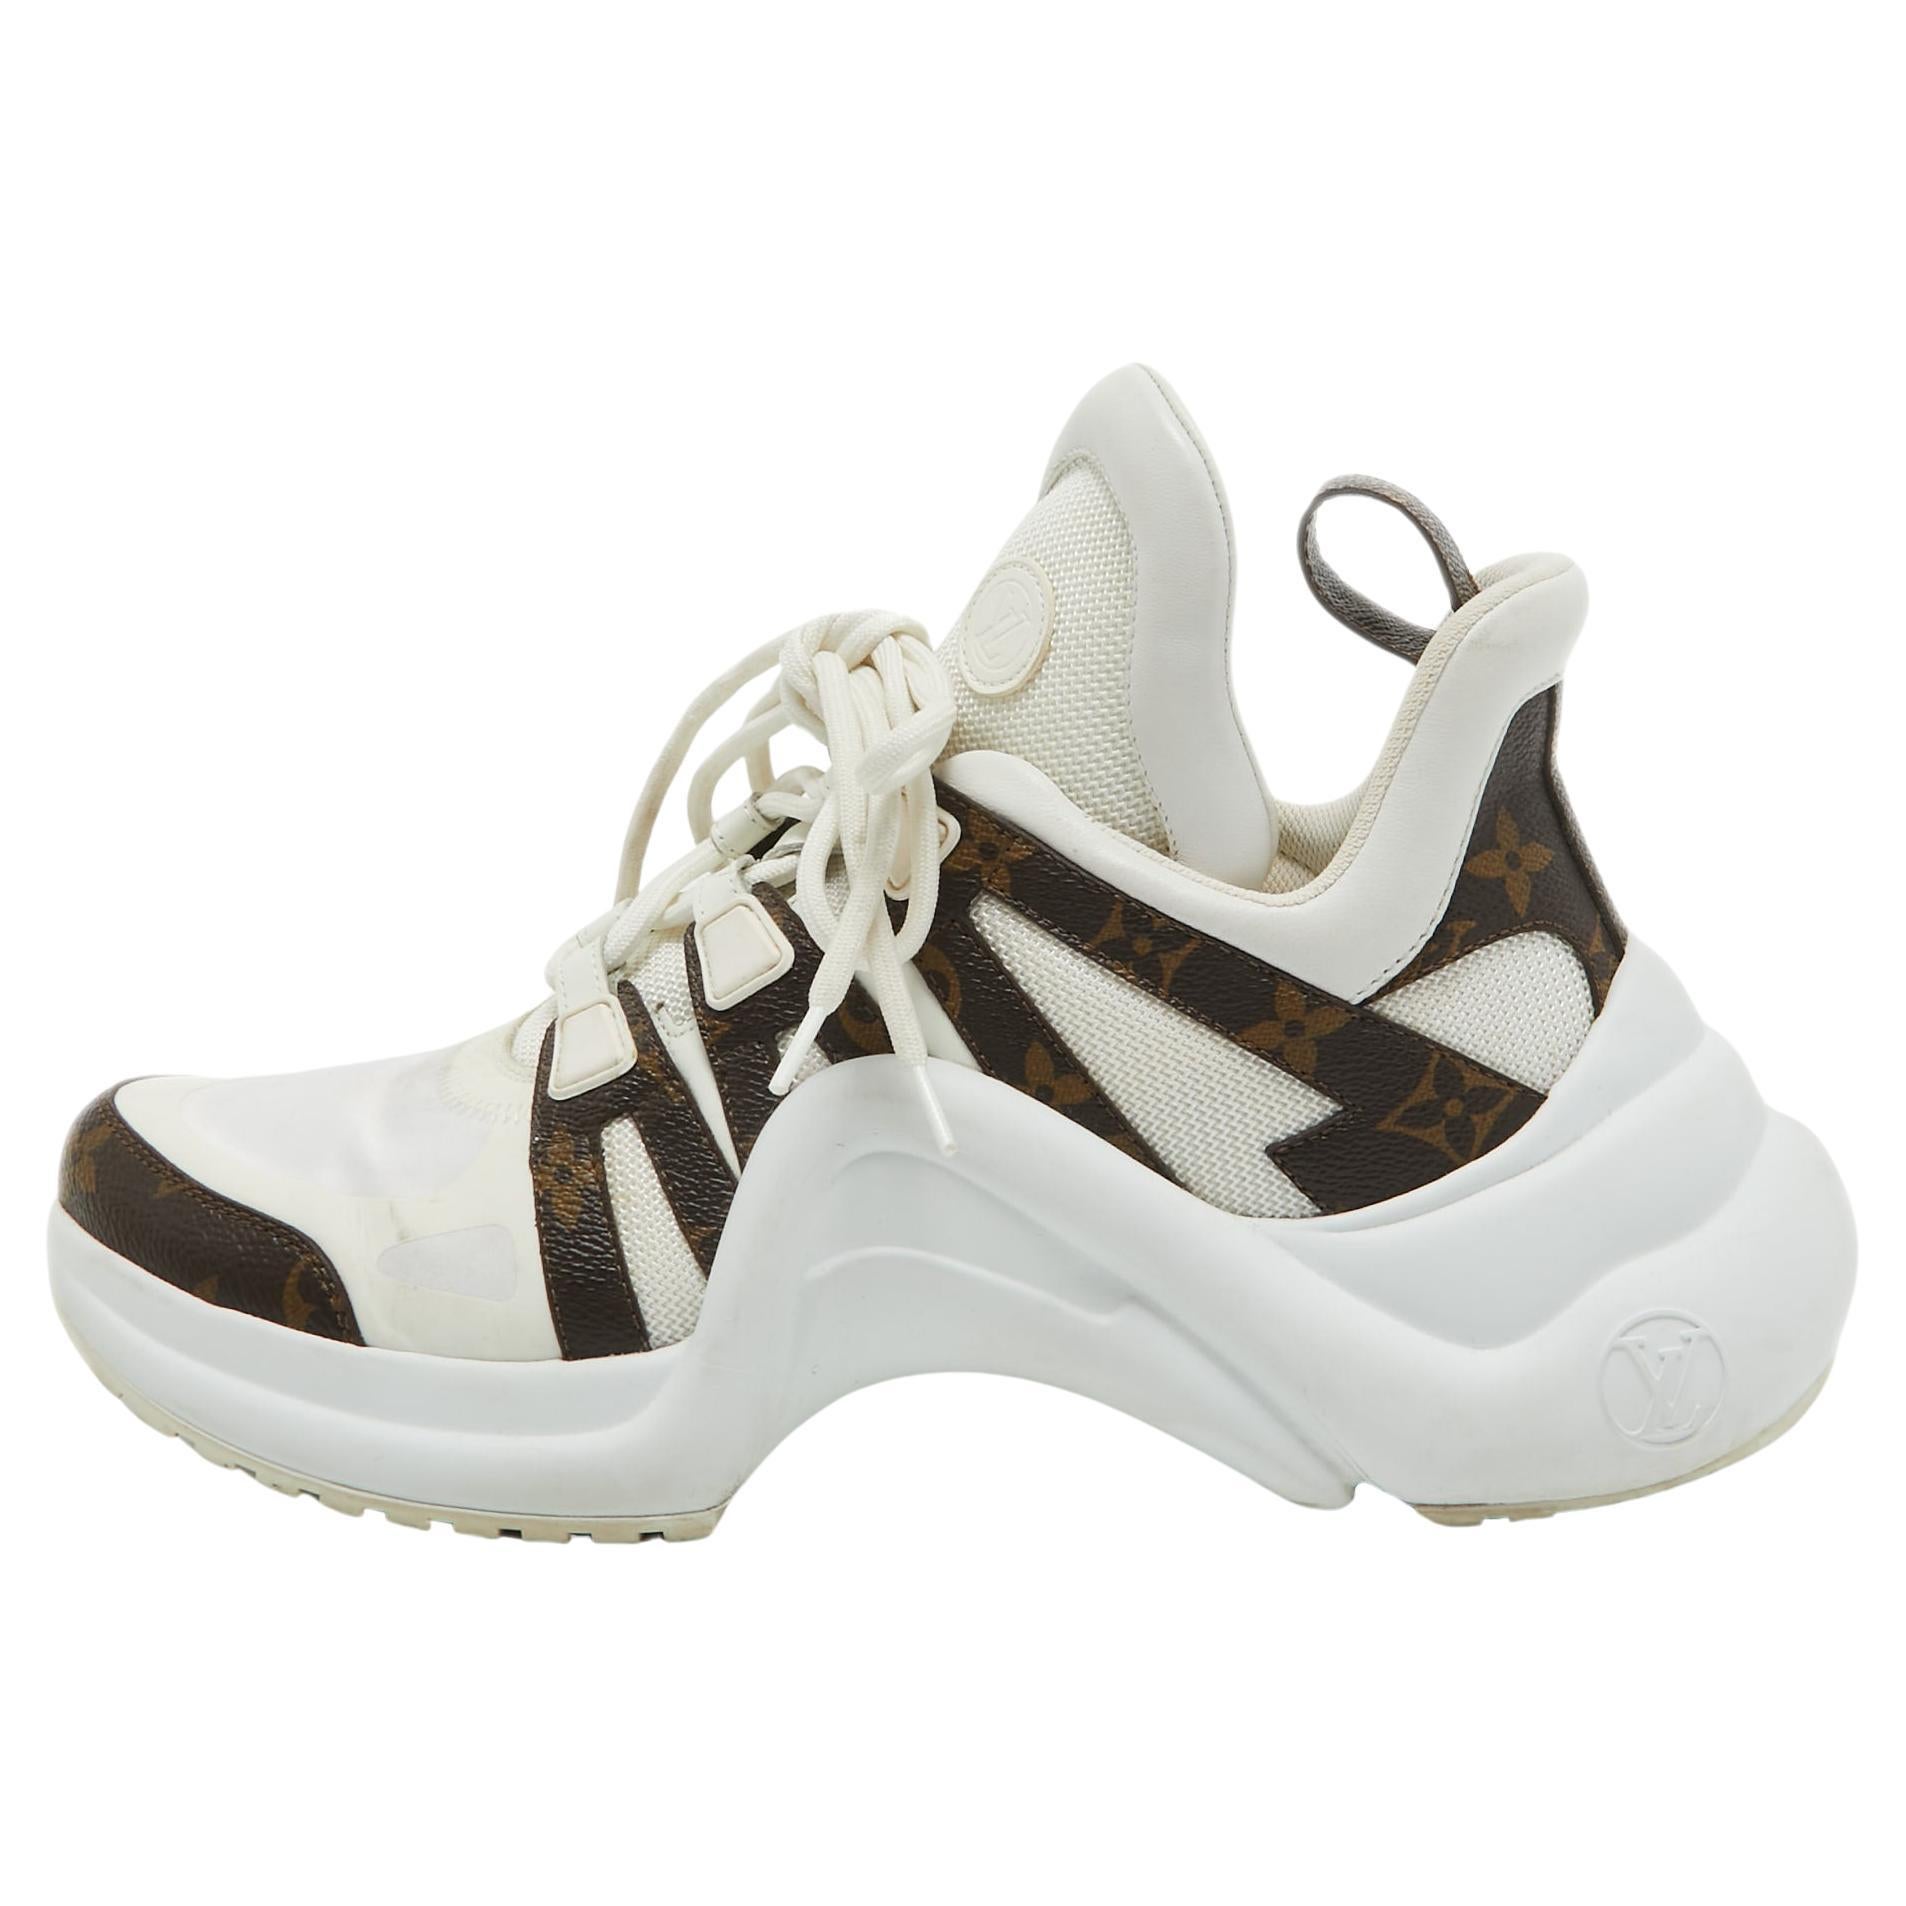 Louis Vuitton White/Brown Nylon and Monogram Canvas Archlight Sneakers Size 41 For Sale